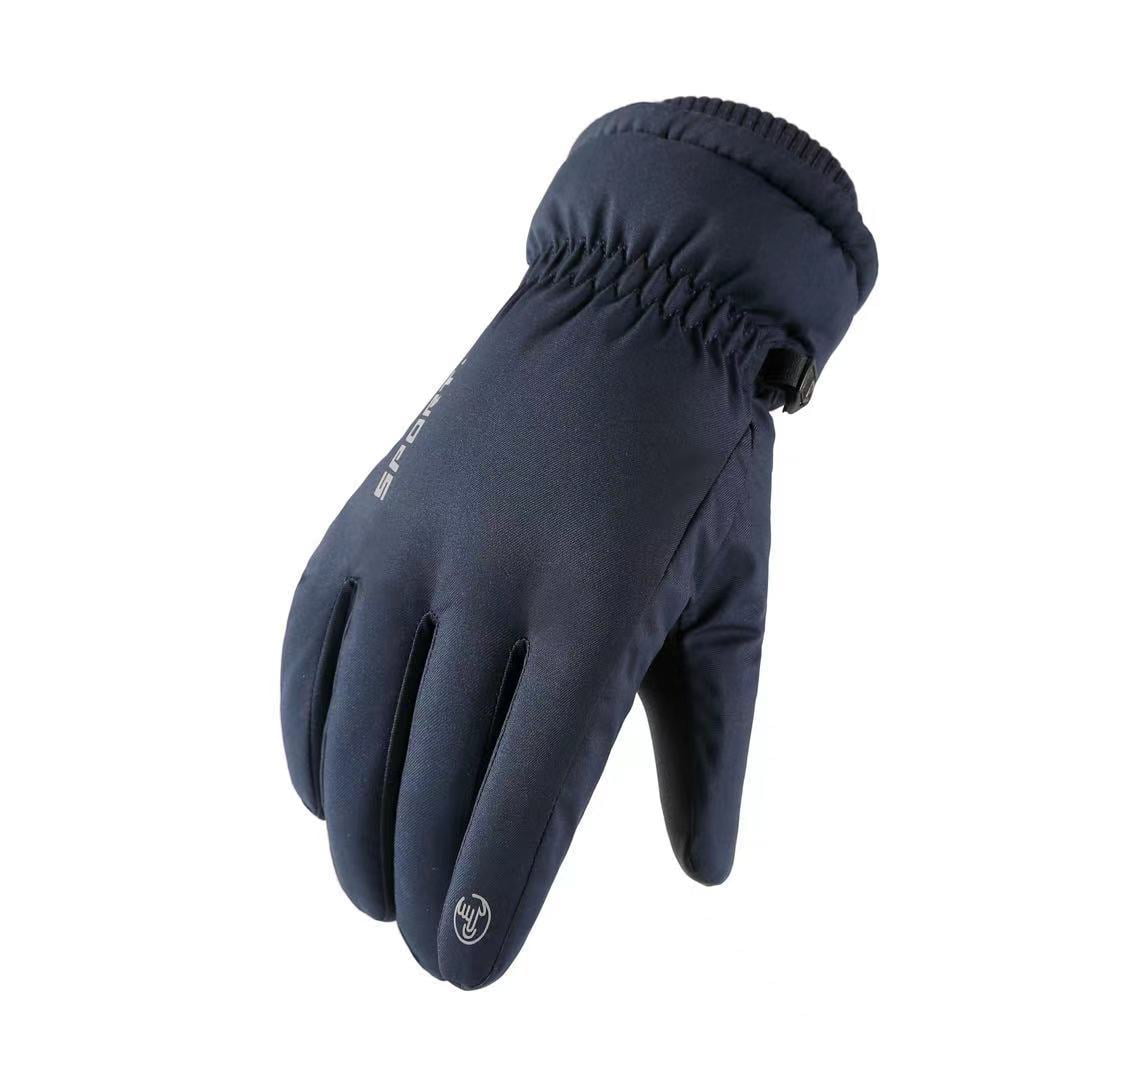 Winter Gloves for Men Touchscreen Cold Weather Windproof Warm Thermal Grip for Outdoor Running Ski Snow Work Lightweight 